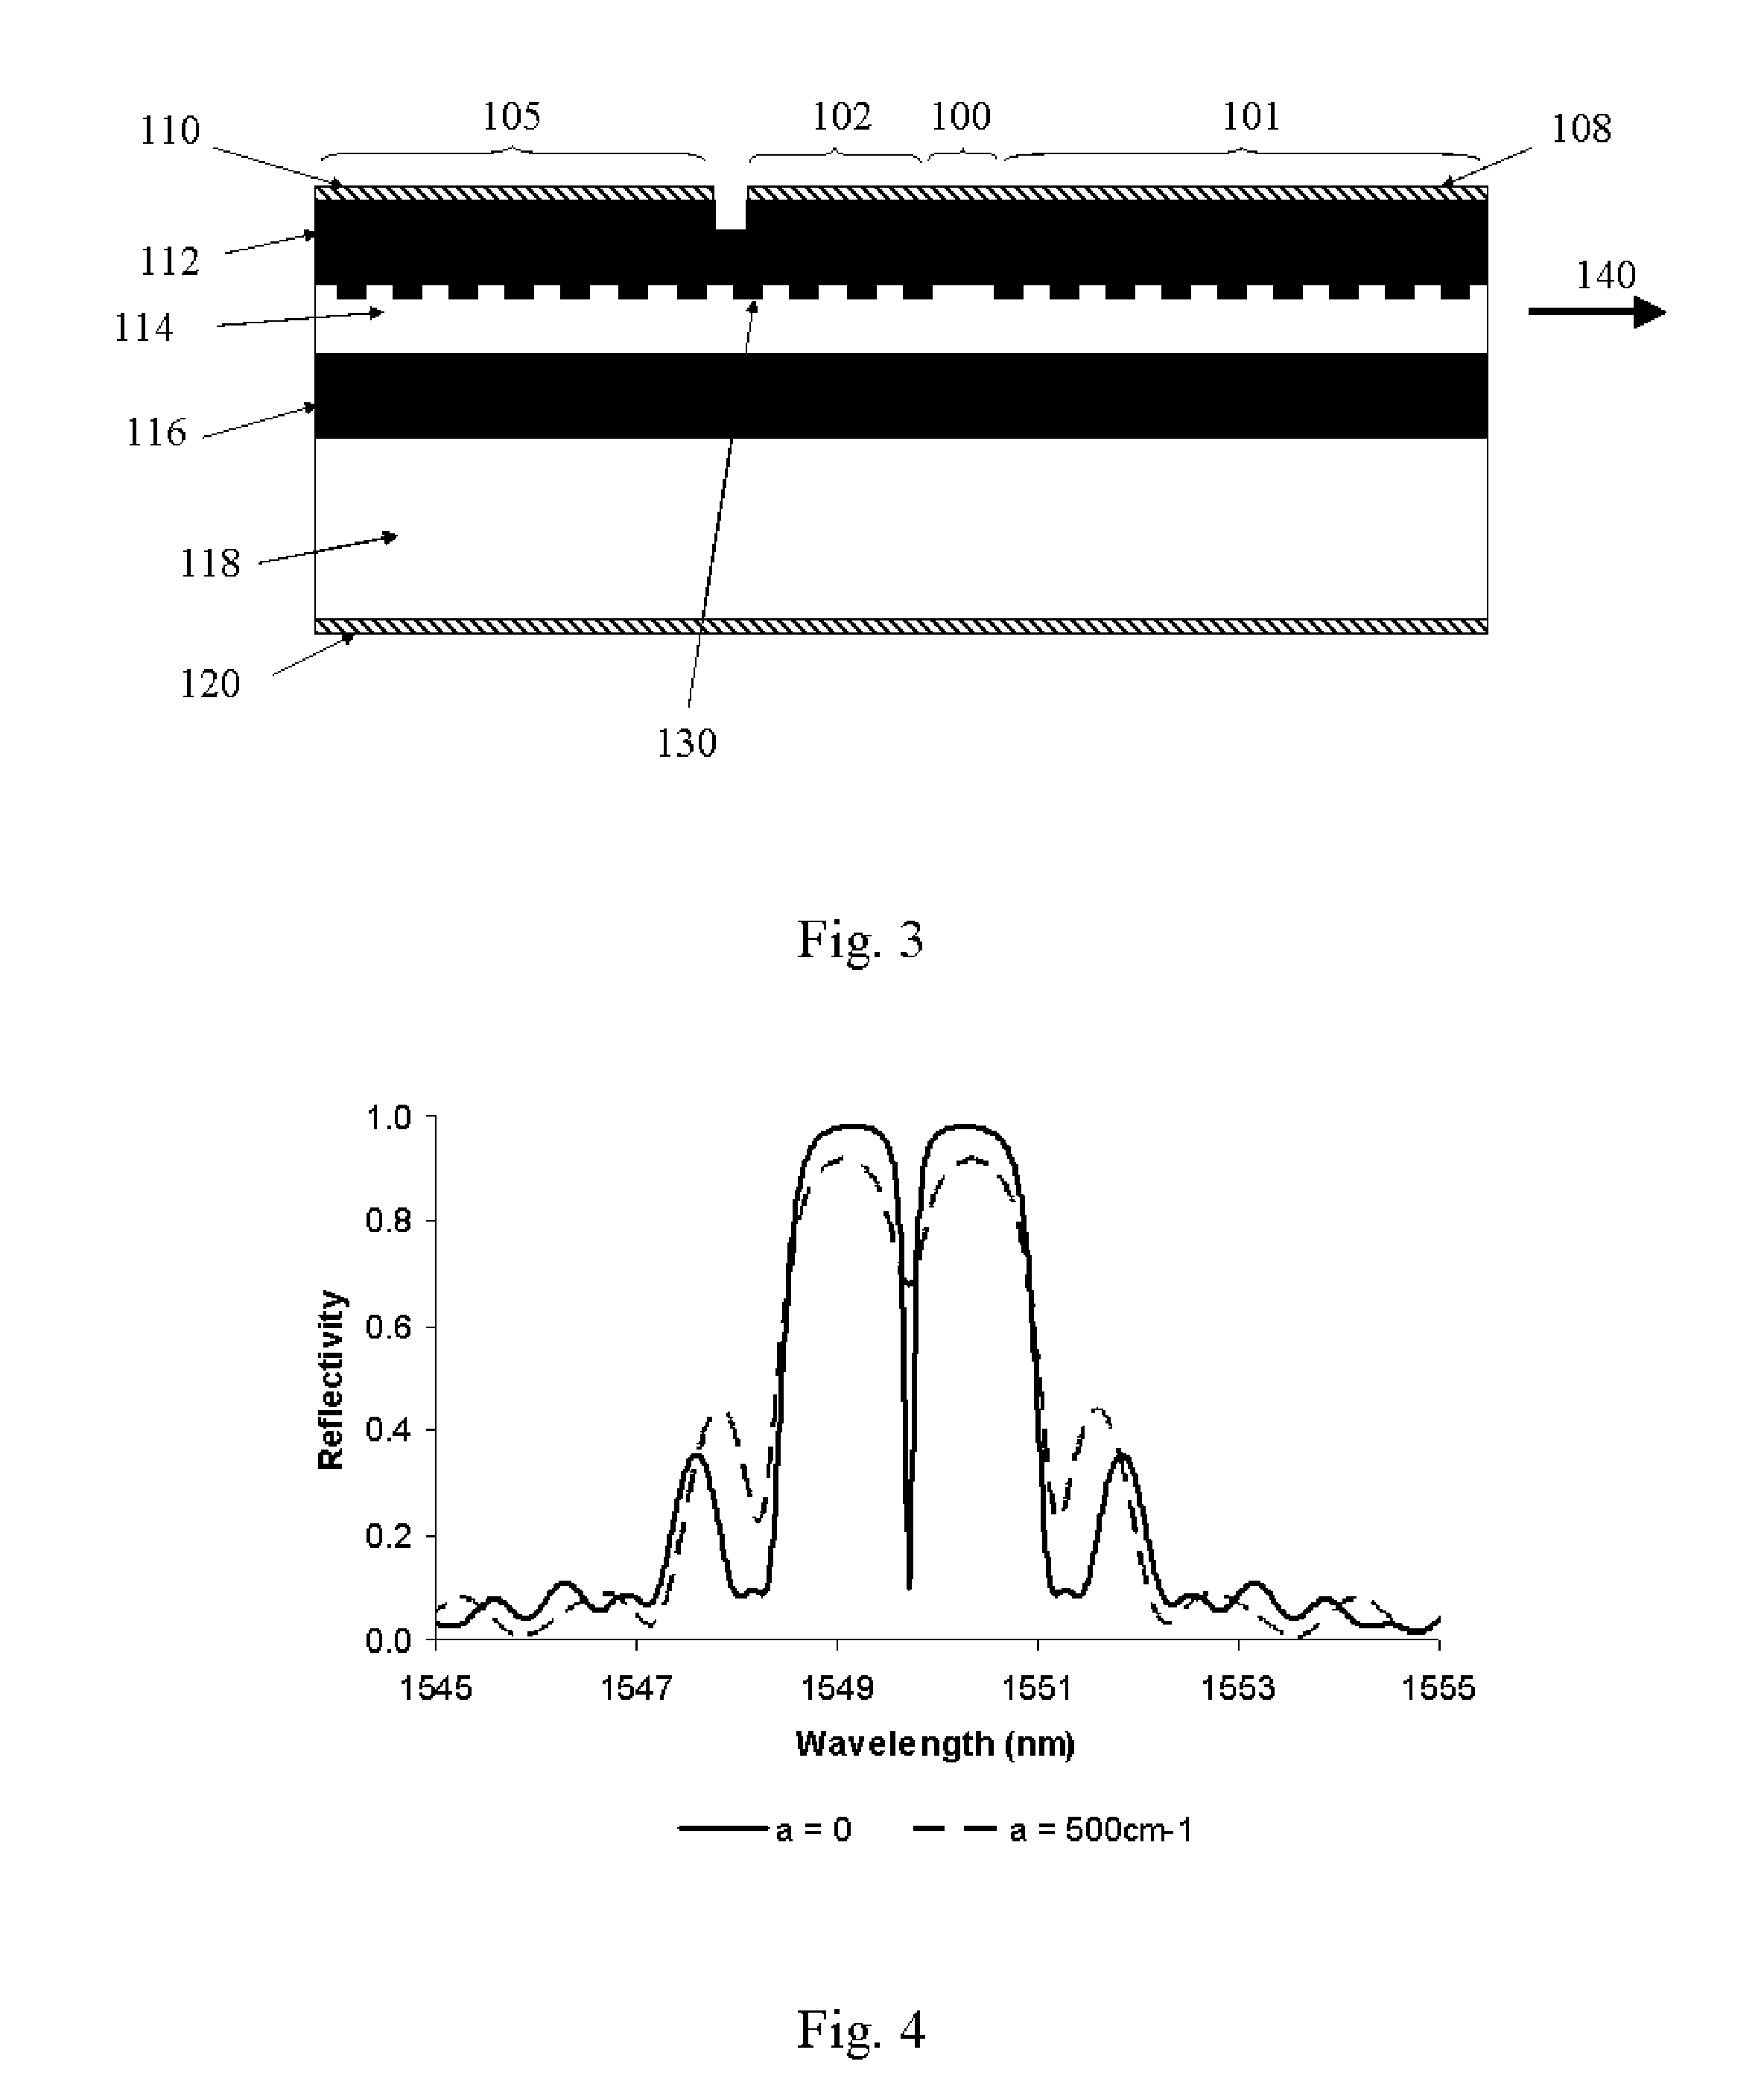 Q-modulated semiconductor laser with electro-absorptive grating structures